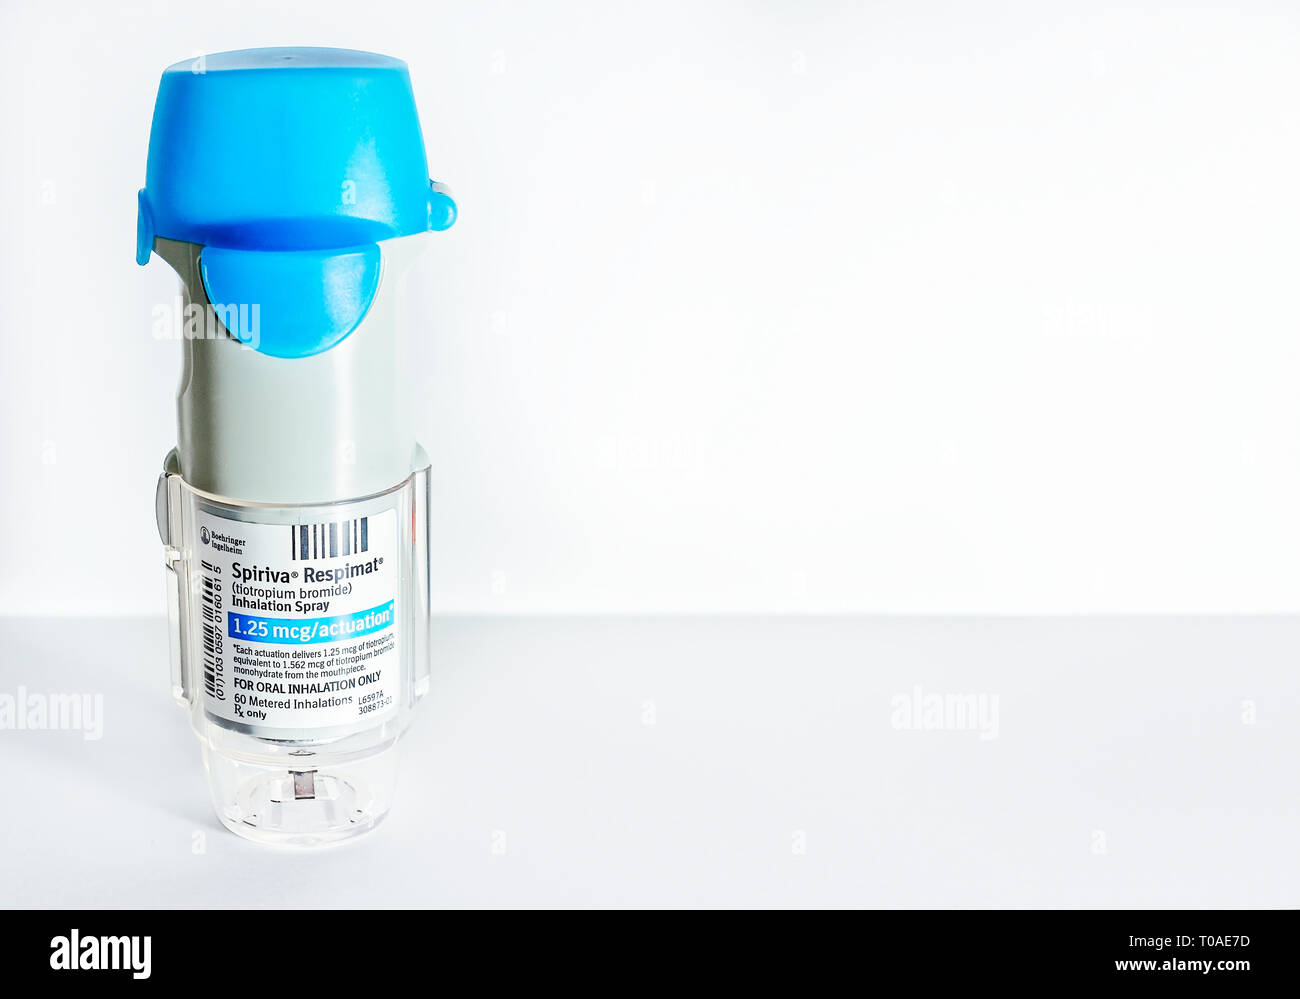 Spiriva Respimat, a popular metered inhaler for asthma and COPD, is pictured on white. Spiriva, a bronchodilator, is made by Boehringer Ingelheim. Stock Photo